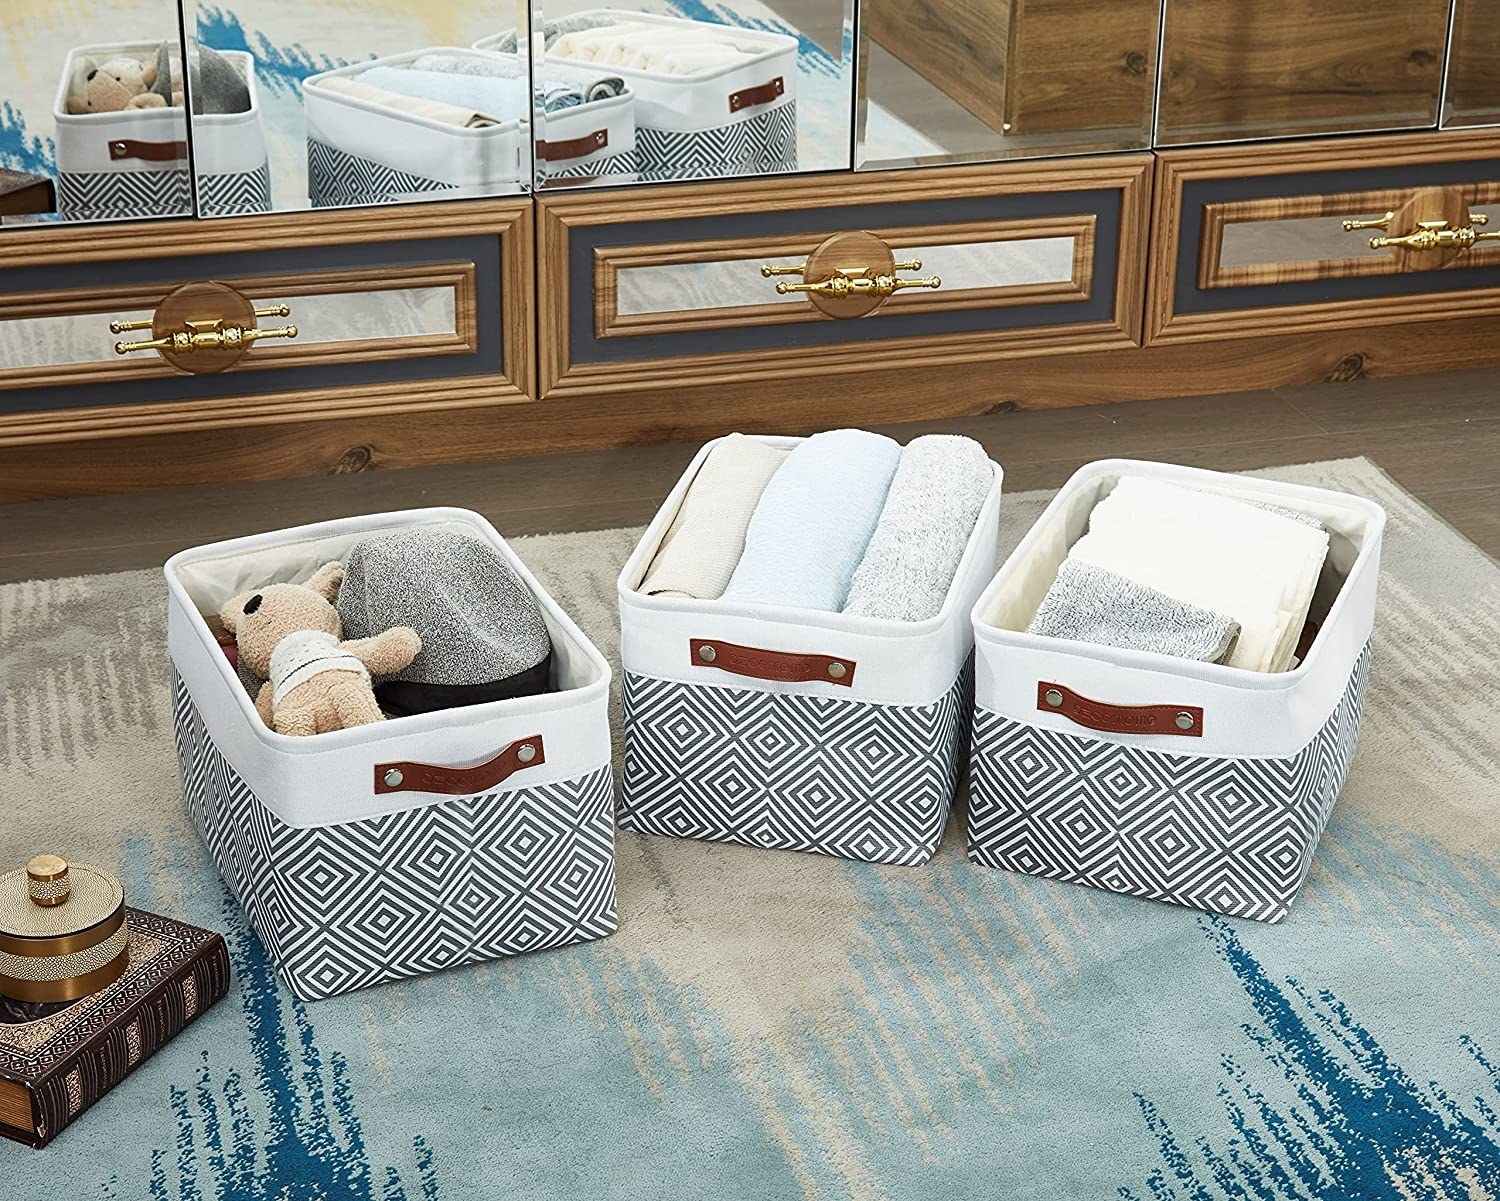 three stylish storage baskets with toys and towels in each